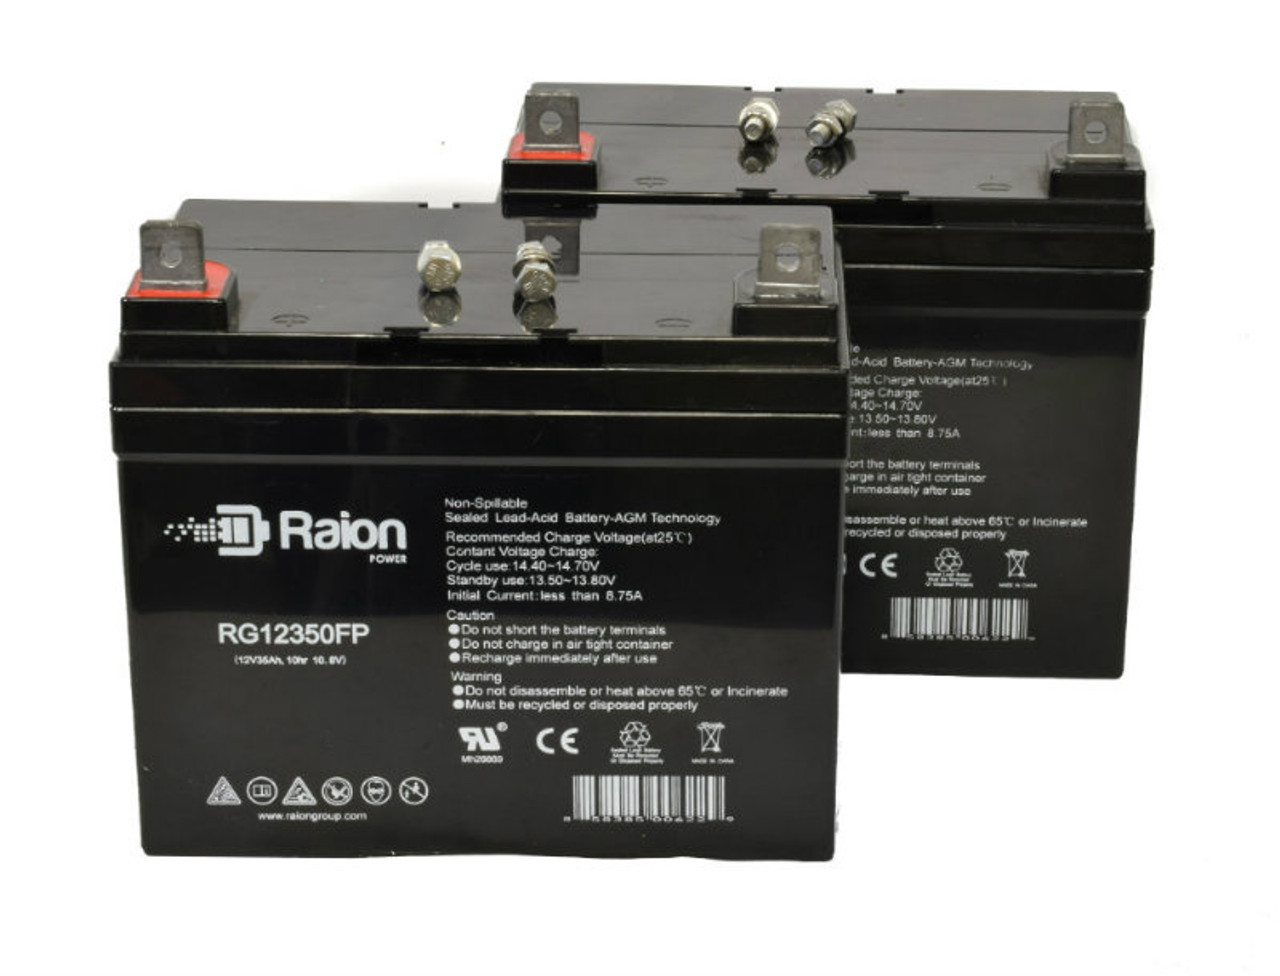 Raion Power Replacement 12V 35Ah Lawn Mower Battery for Allis-Chalmers 1817 - 2 Pack